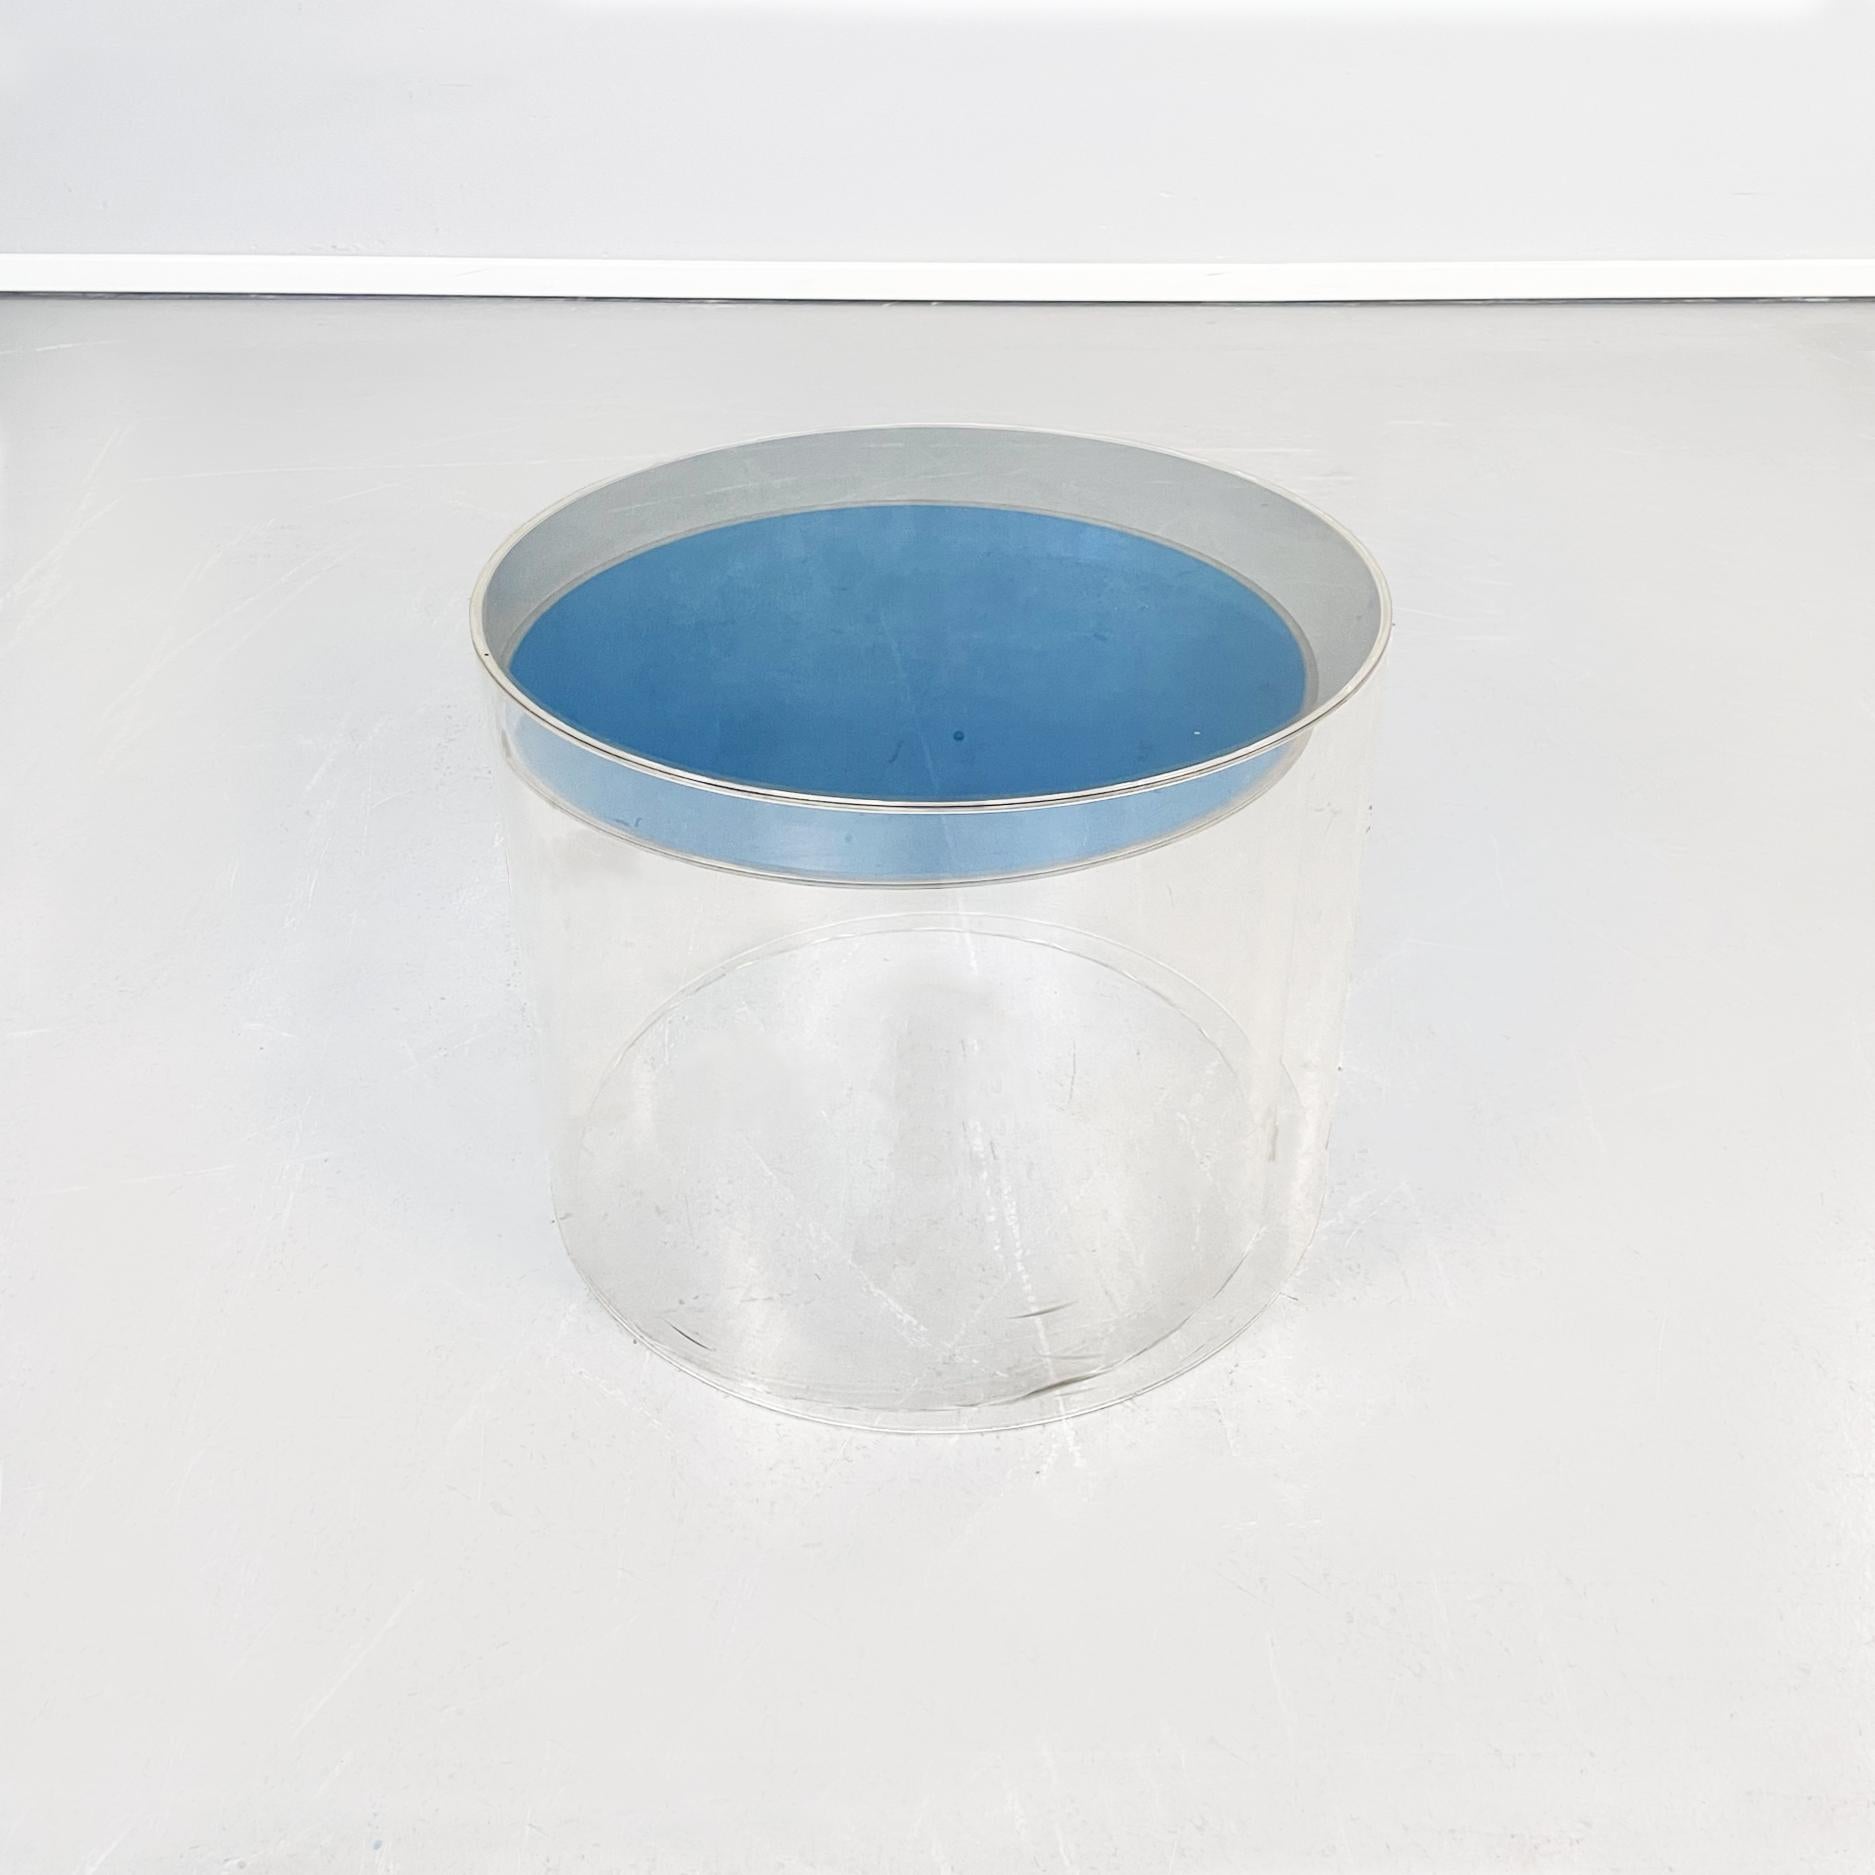 Italian post-modern Cylindrical coffee tables in grey and blue plexiglass, 2000s
Pair of cylindrical coffee tables, in plexiglass. The higher table has a round top in gray, while the smaller in light blue. The sides are in transparent plexiglass.